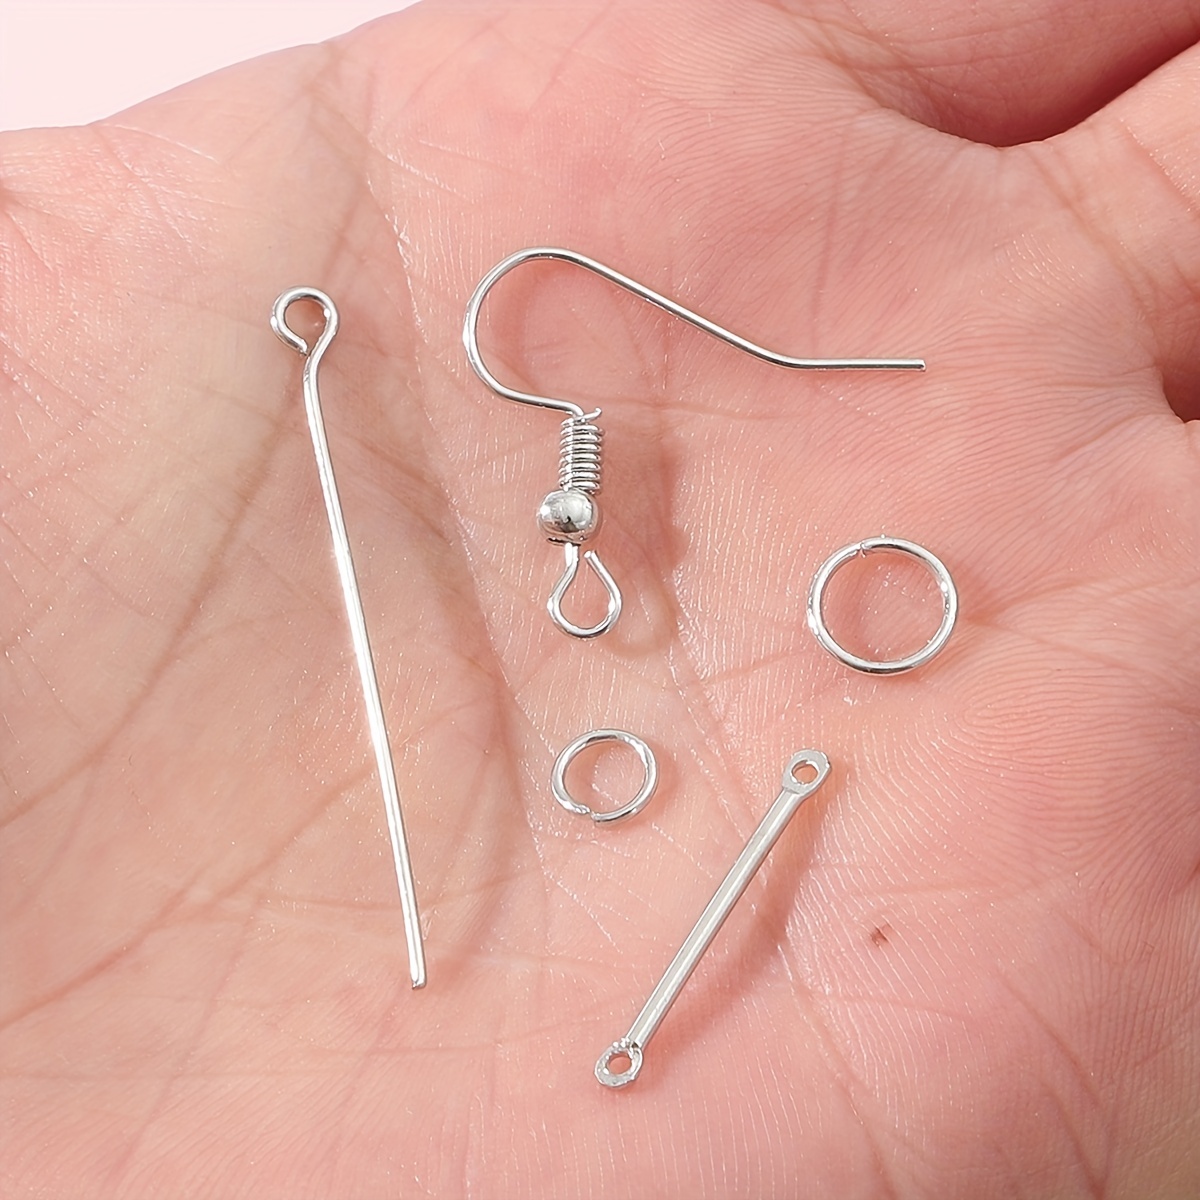 220Pcs/Set Of Earring Accessories Including Ear Hook/9-pin/Open Jump  Rings/Double Hole Hanging Rod, For DIY Jewelry Making And Repairing Small  Busines